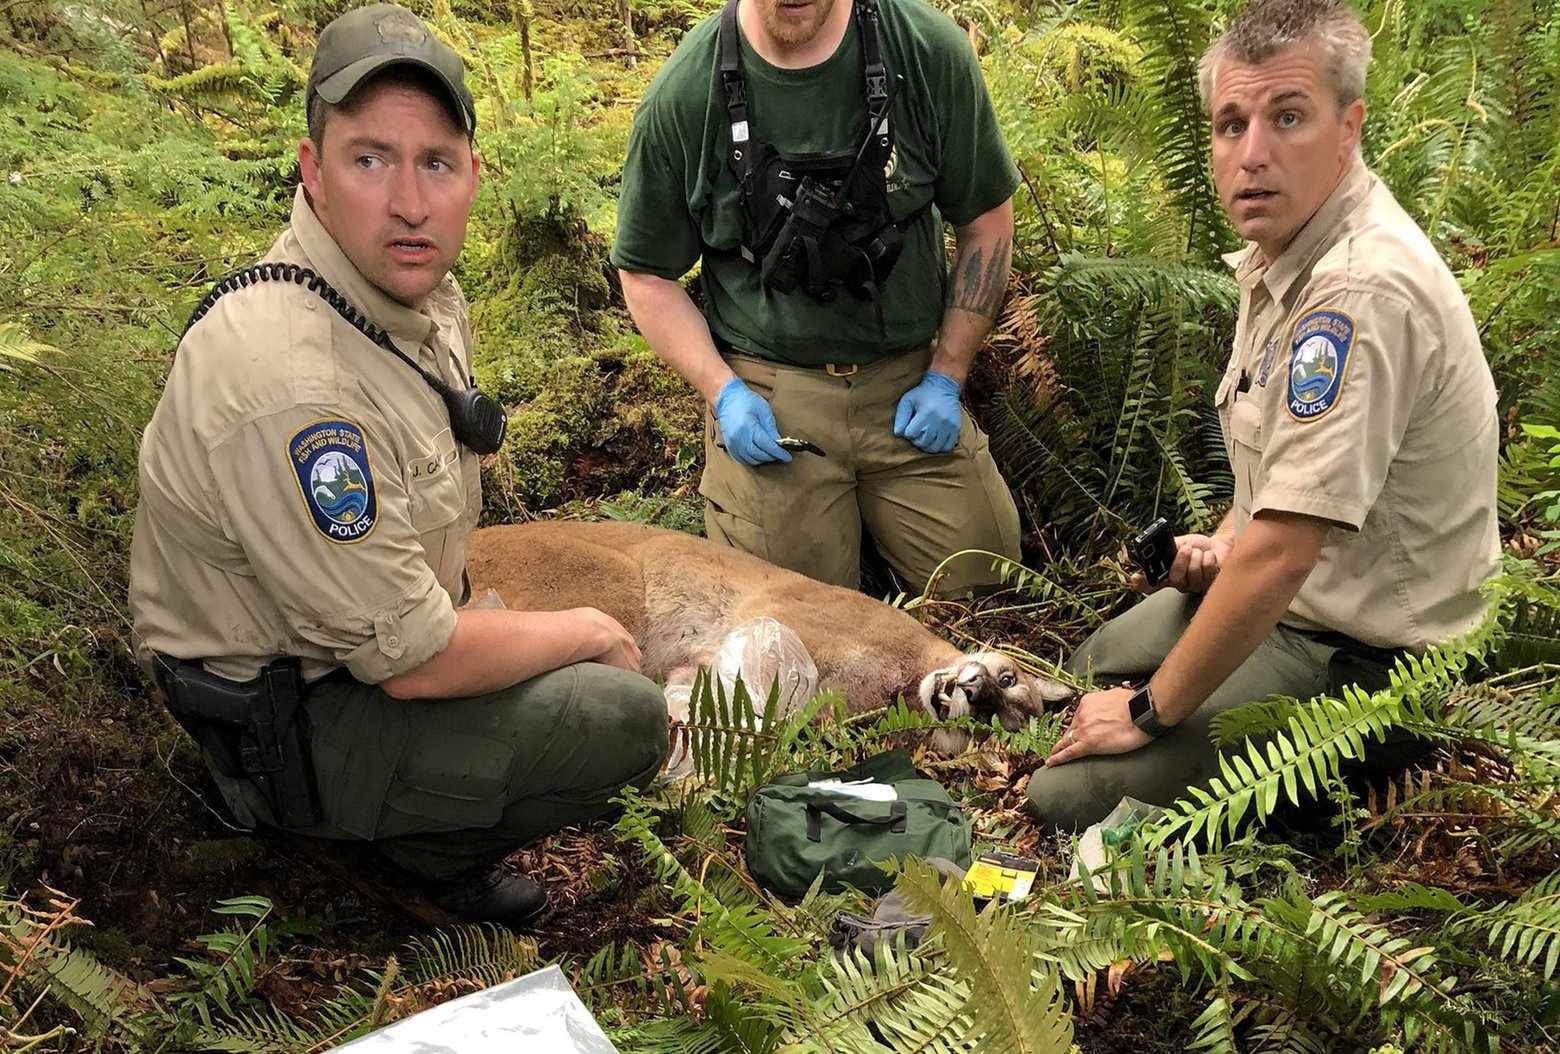 Washington Dept. of Fish & Wildlife agents tracked and killed the cougar thought responsible for the attack, May 19, 2018. Courtesy Washington DFW